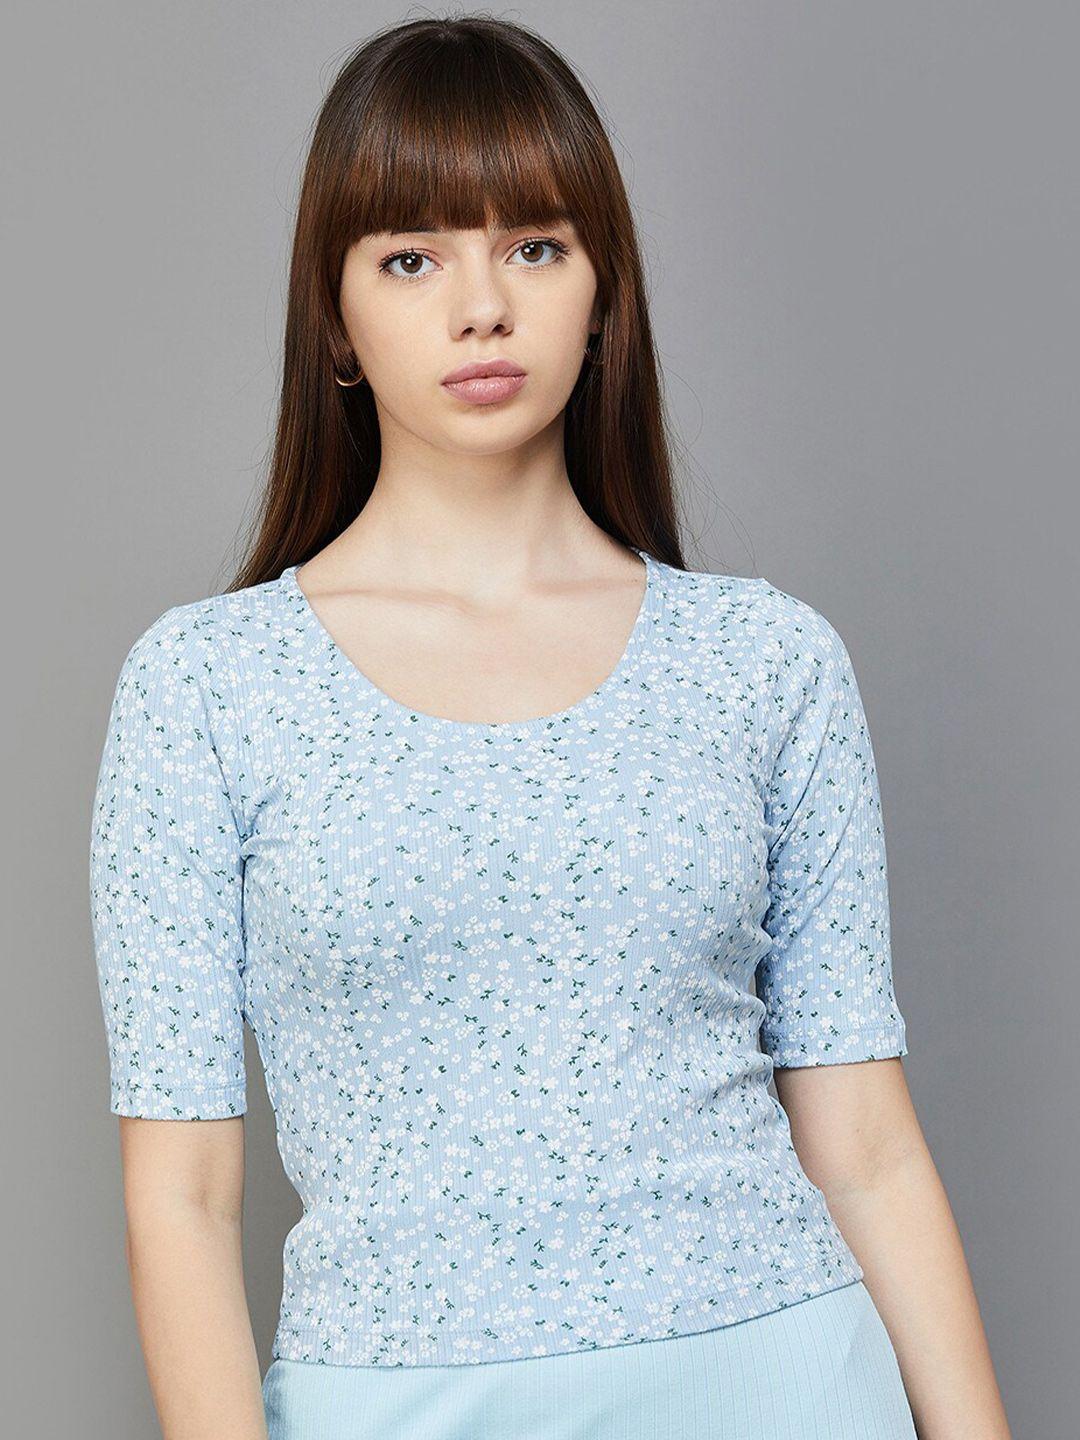 ginger-by-lifestyle-floral-printed-round-neck-top